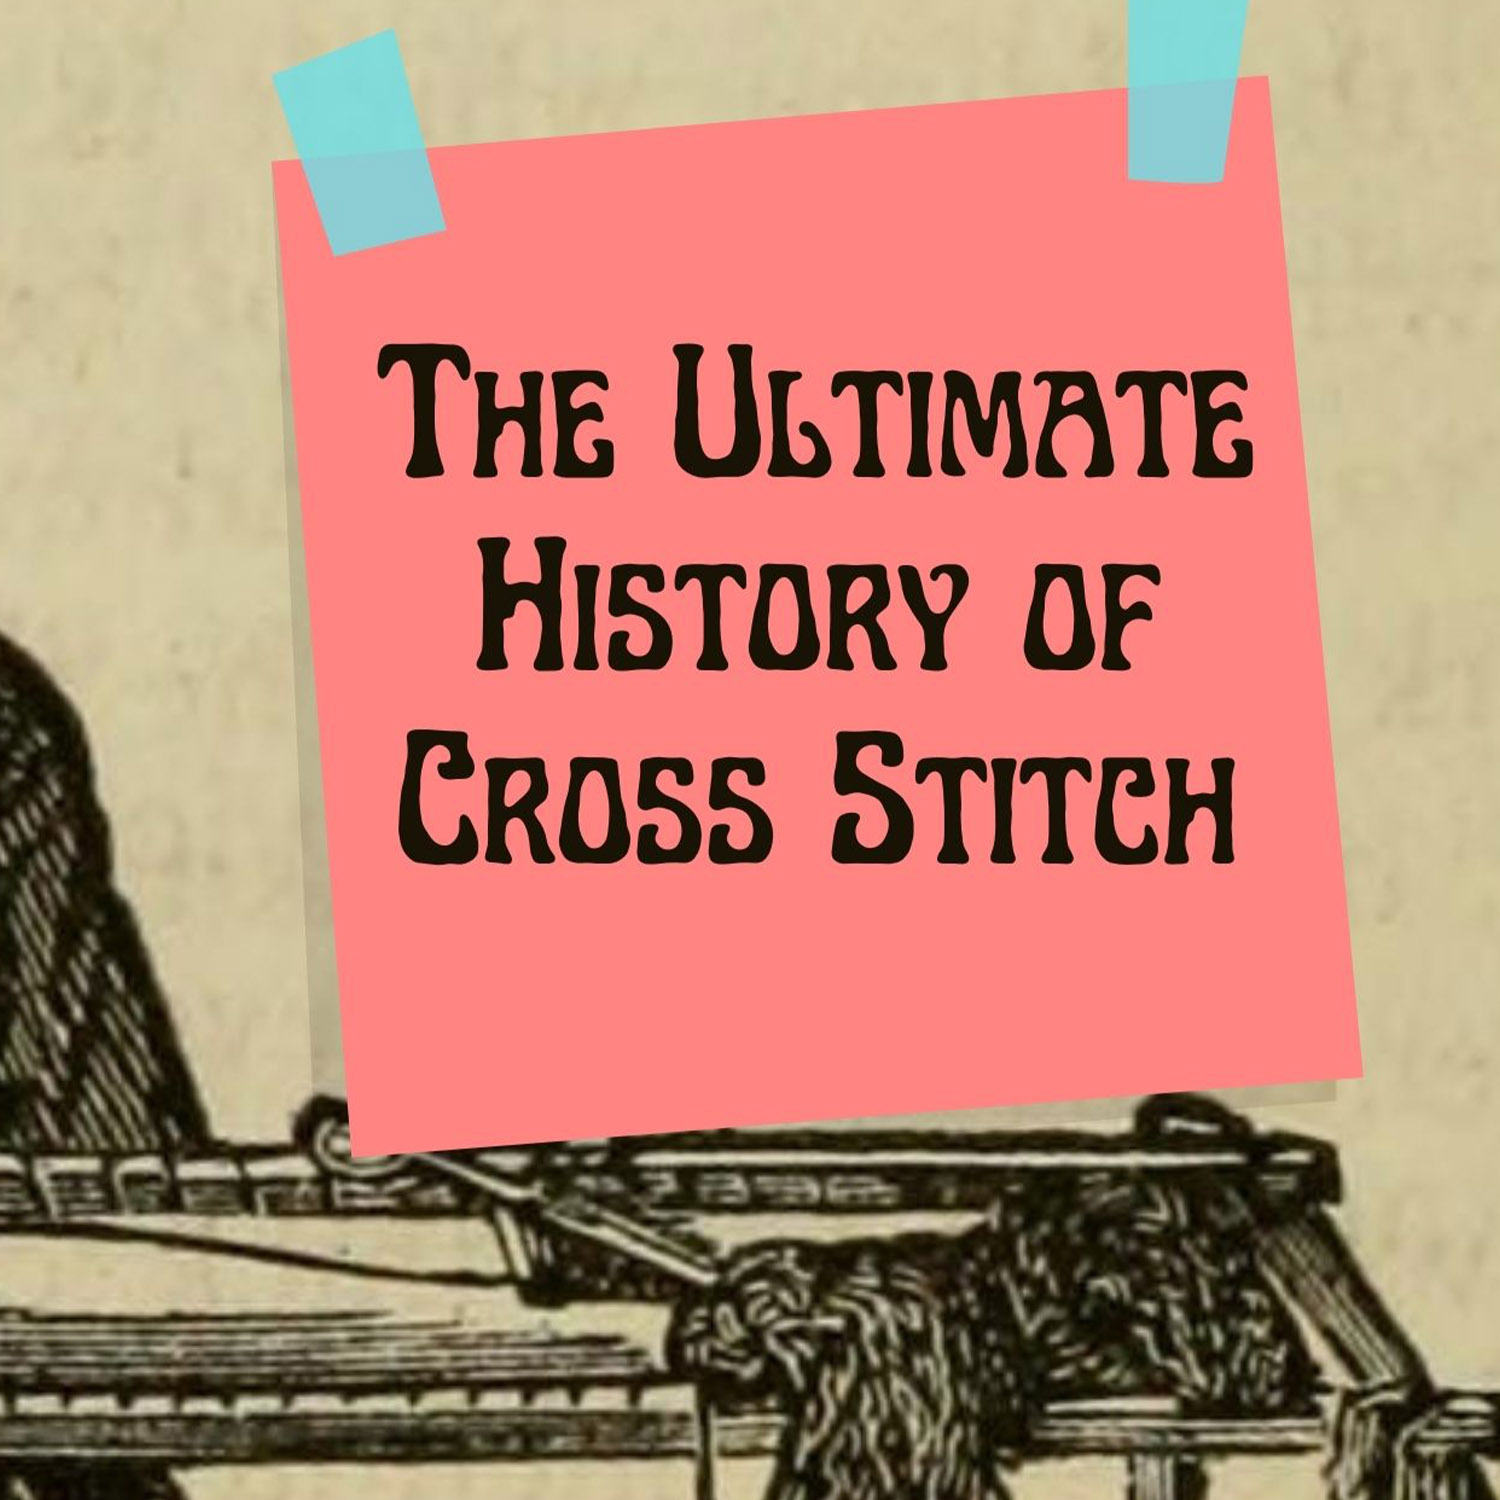 The Ultimate History: Where Does Cross Stitch Come From?